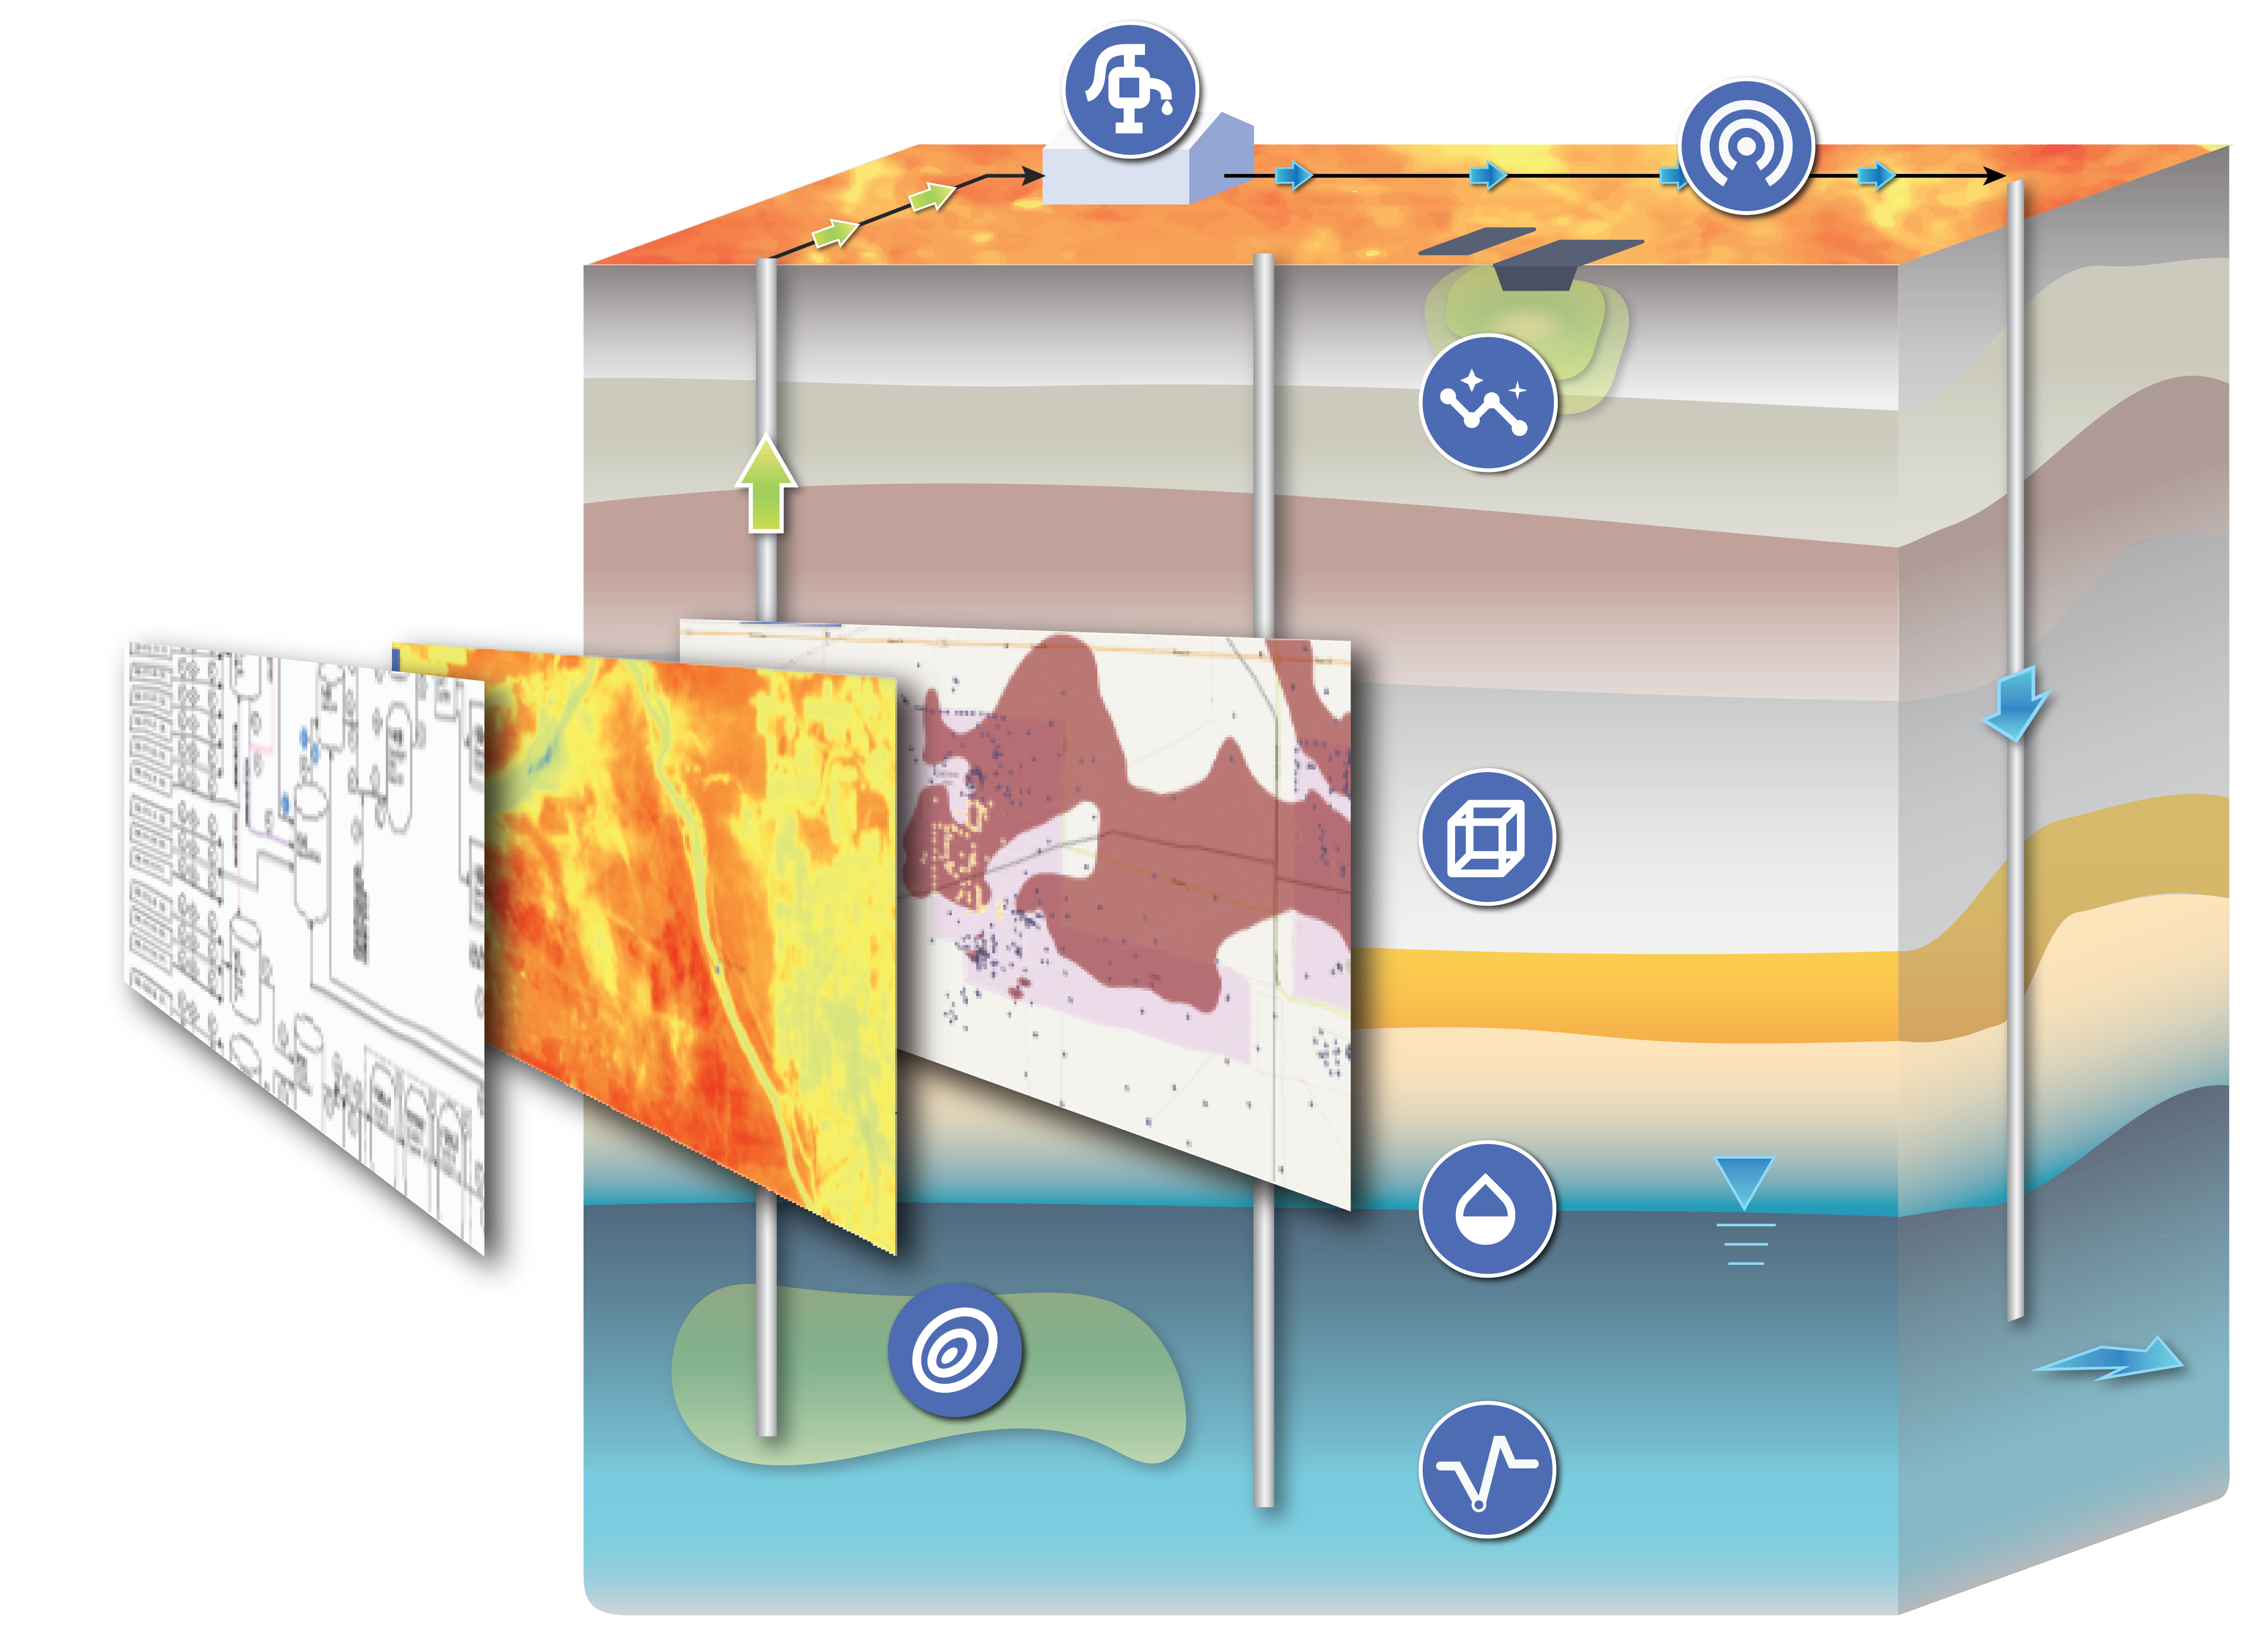 Illustration showing layers of the subsurface